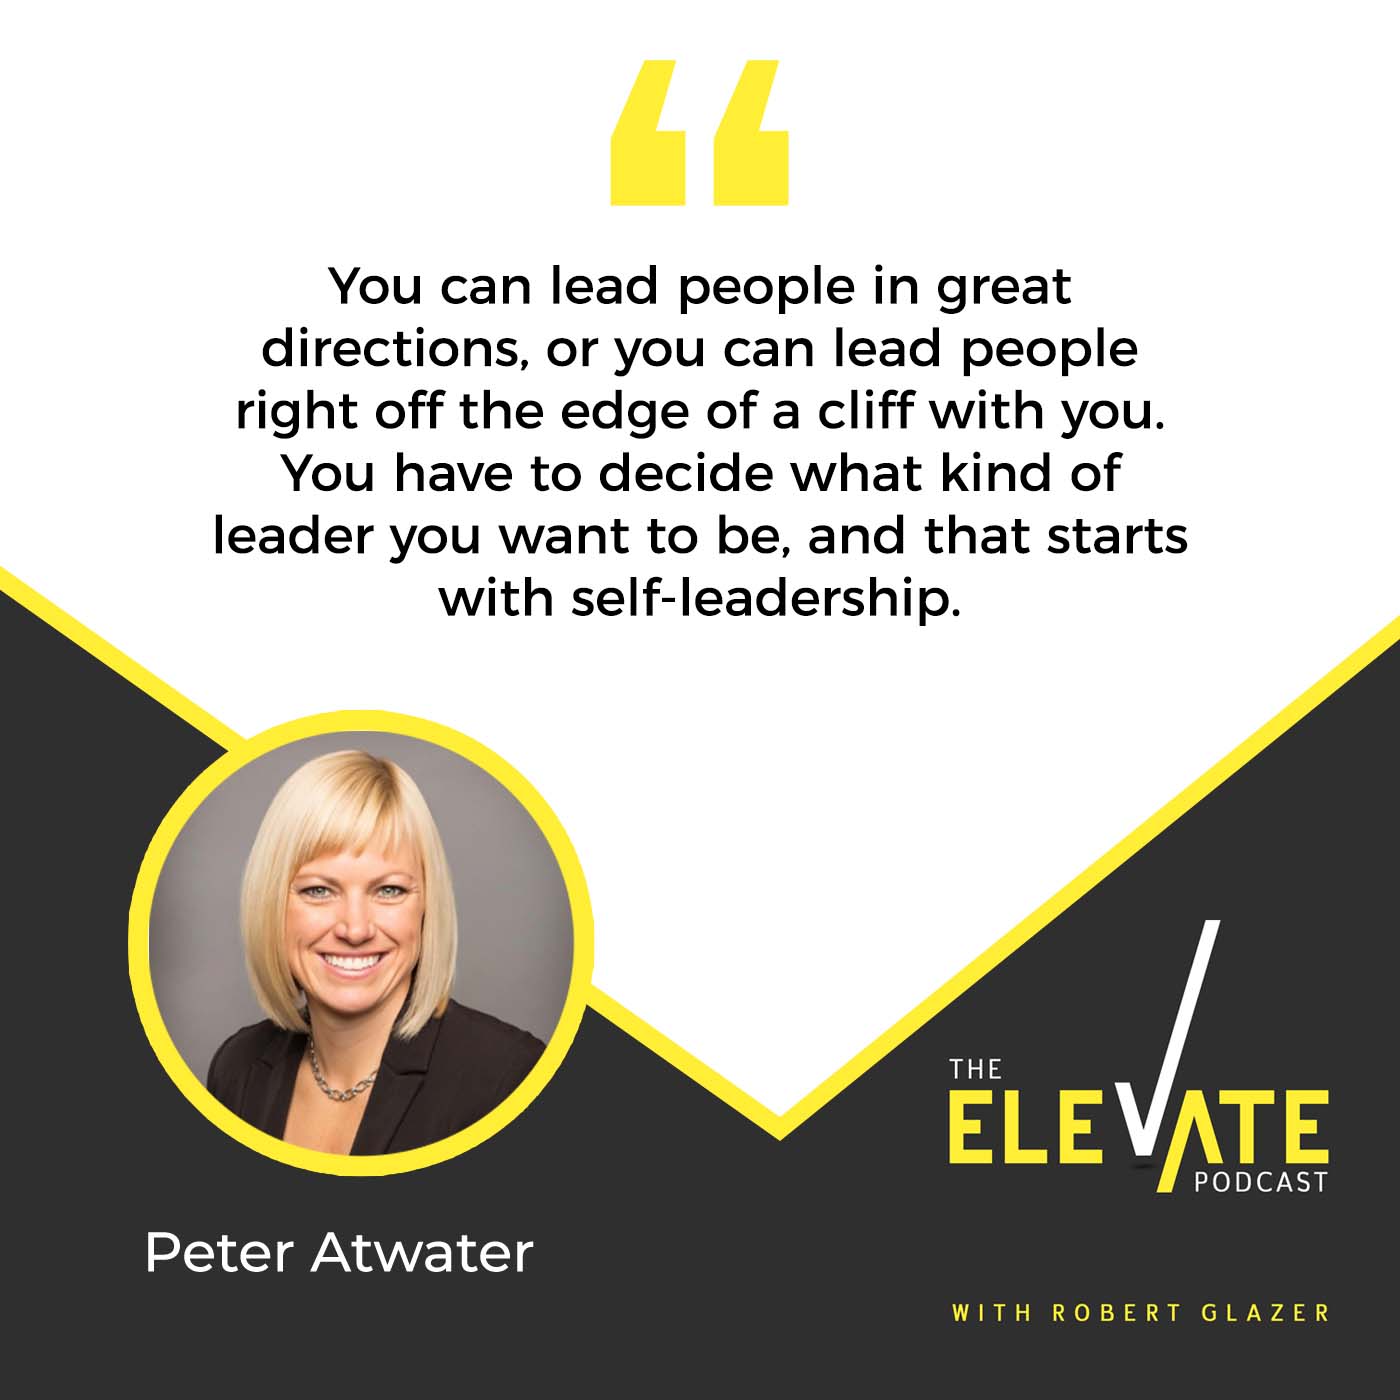 The Elevate Podcast with Robert Glazer | Kerry Siggins | Ownership Mindset